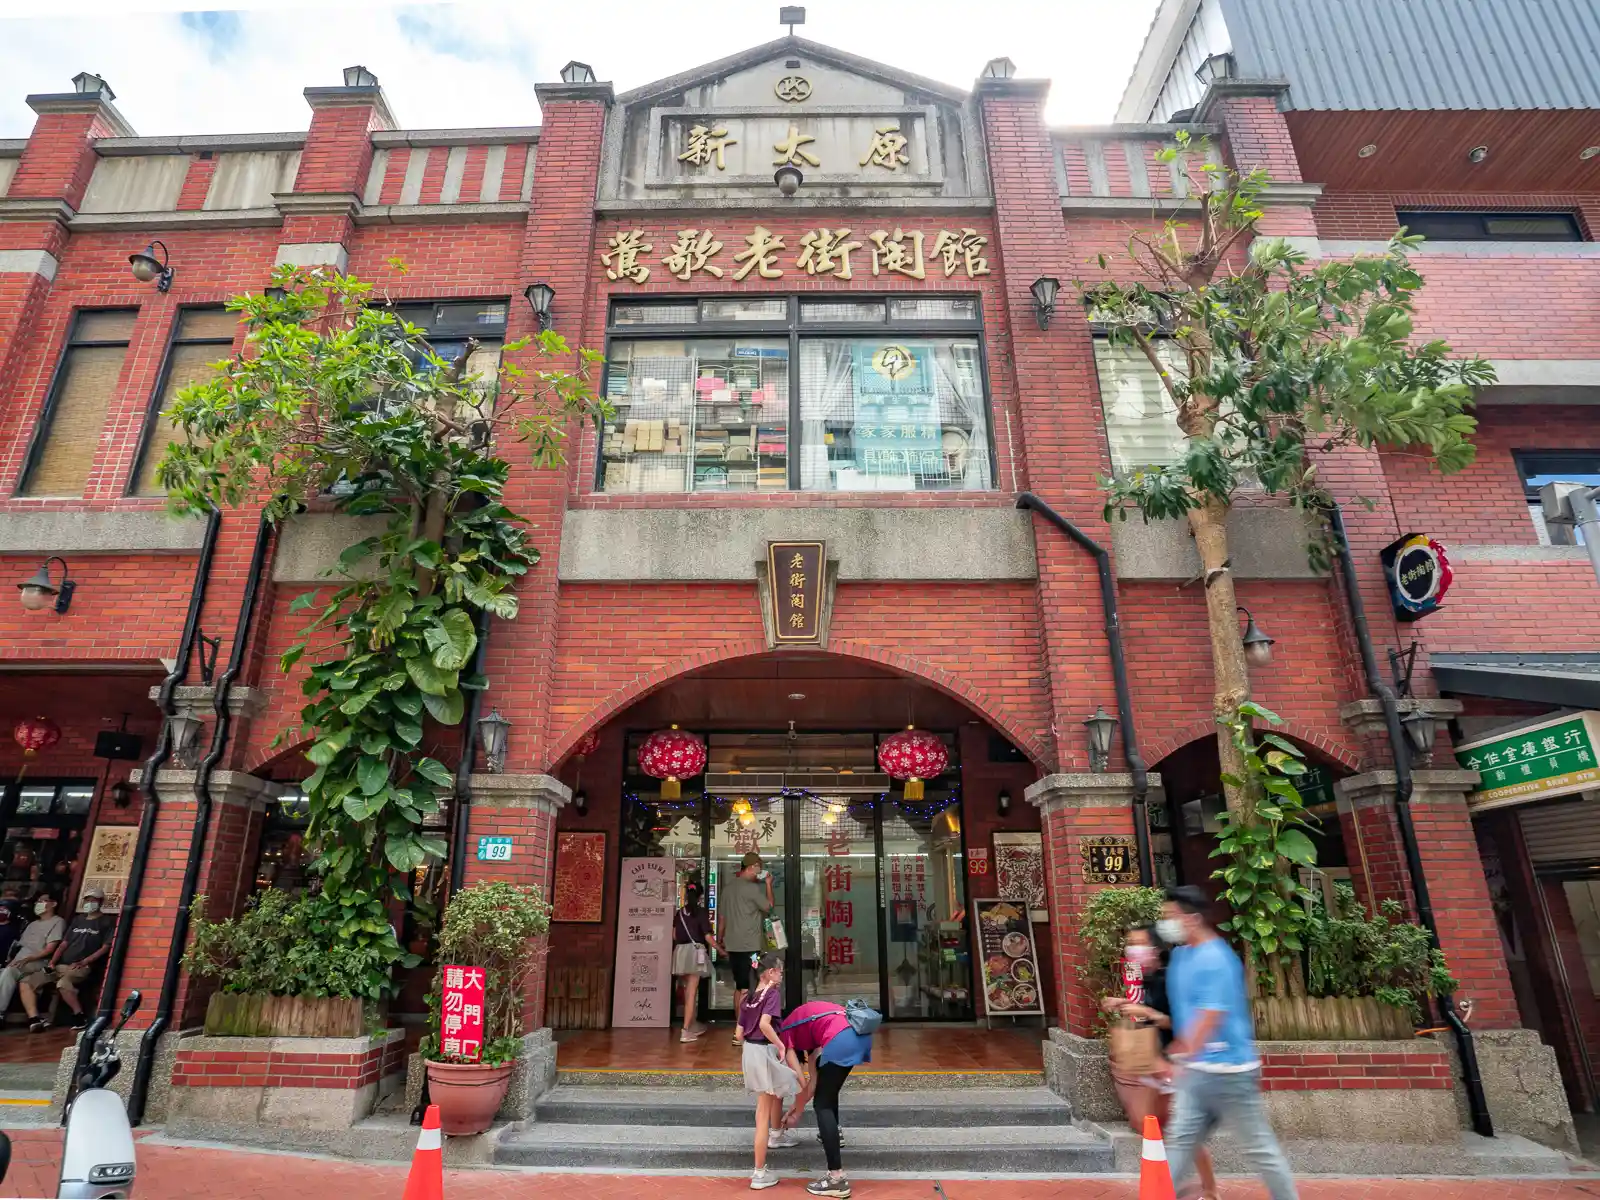 A large 2-story pottery shop boast a red-brick facade.